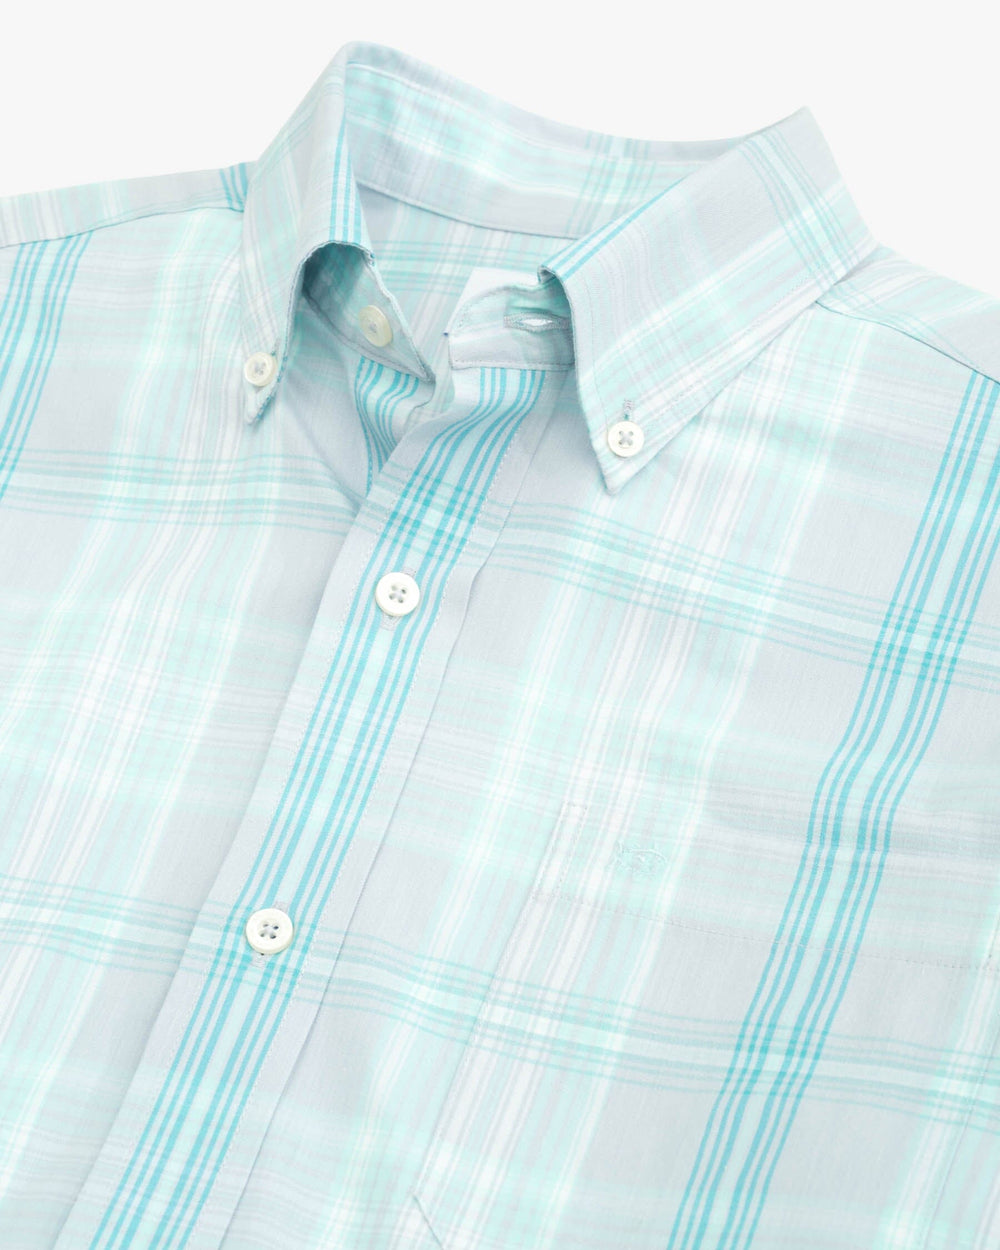 The detail view of the Southern Tide Coastal Passage Heather Oakwood Plaid Intercoastal Sport Shirt by Southern Tide - Heather Silver Lake